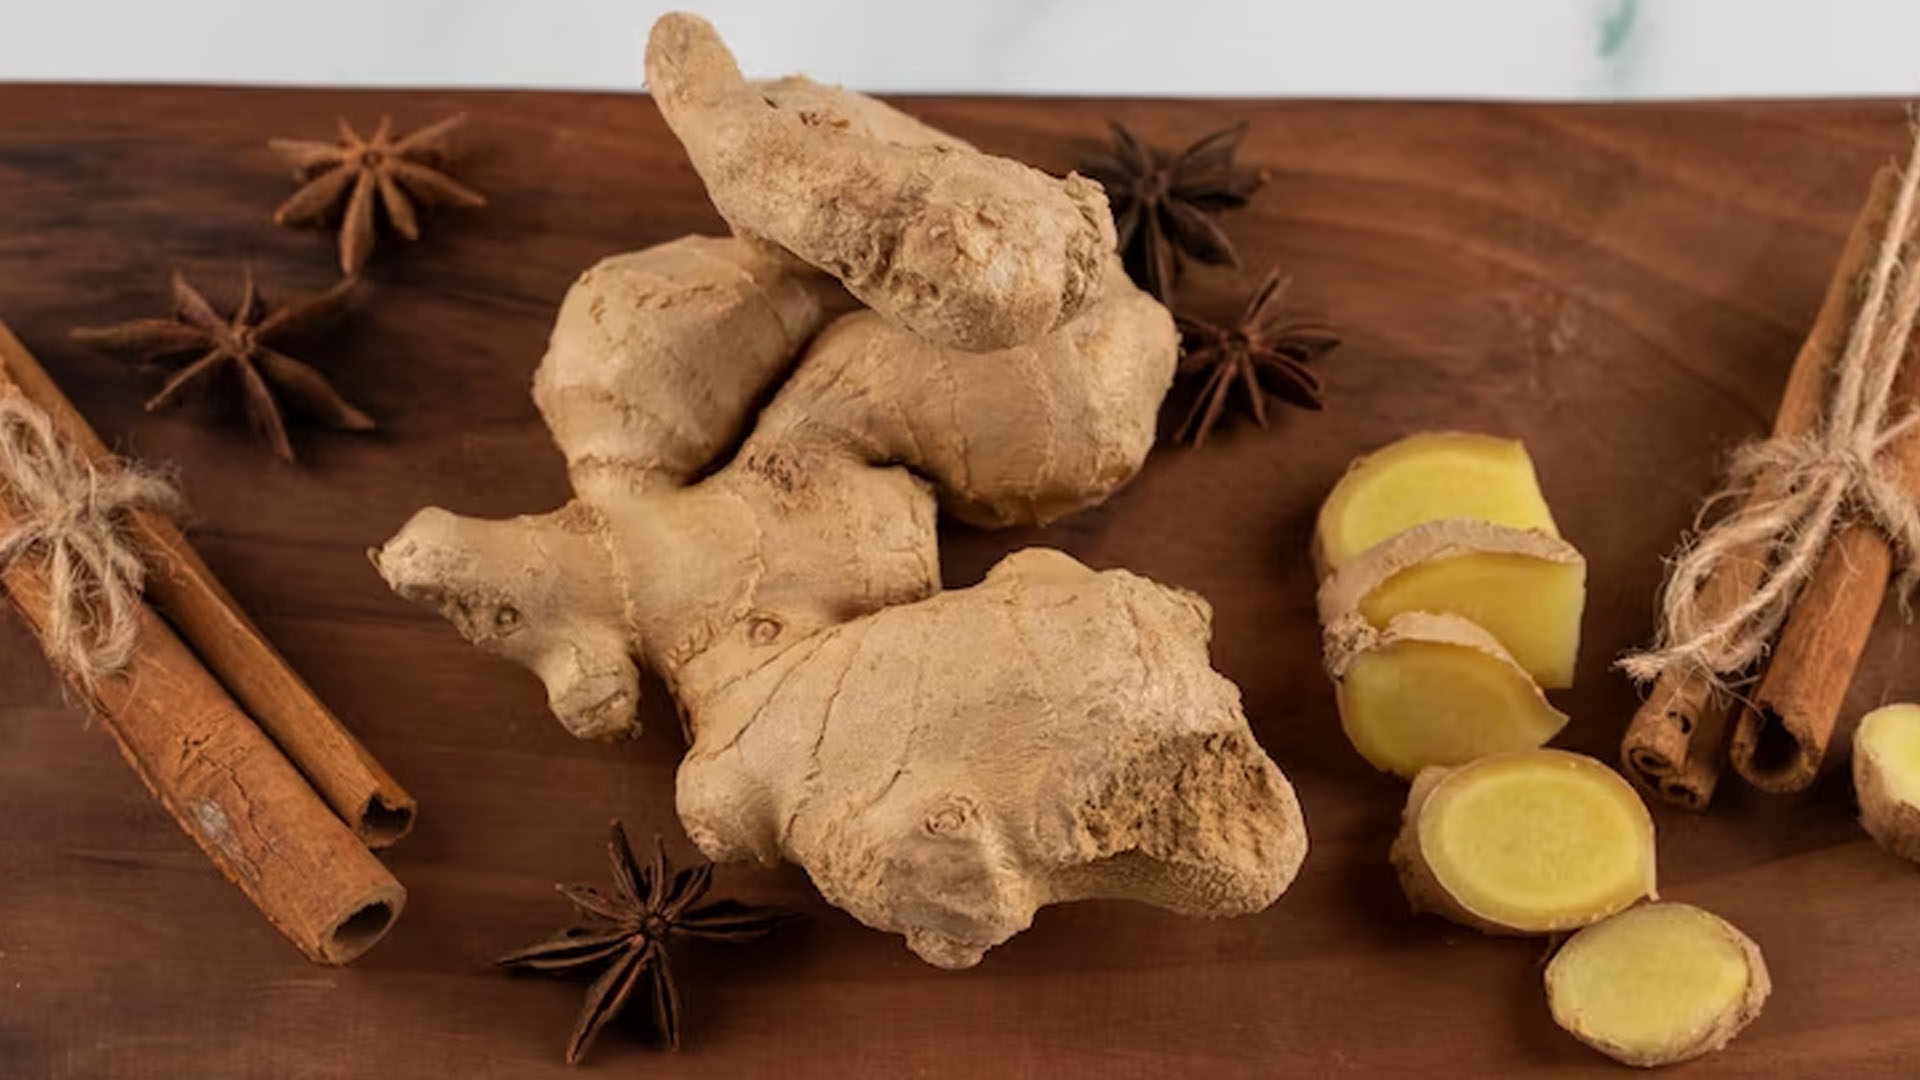 Does Raw Ginger Have Health Benefits?